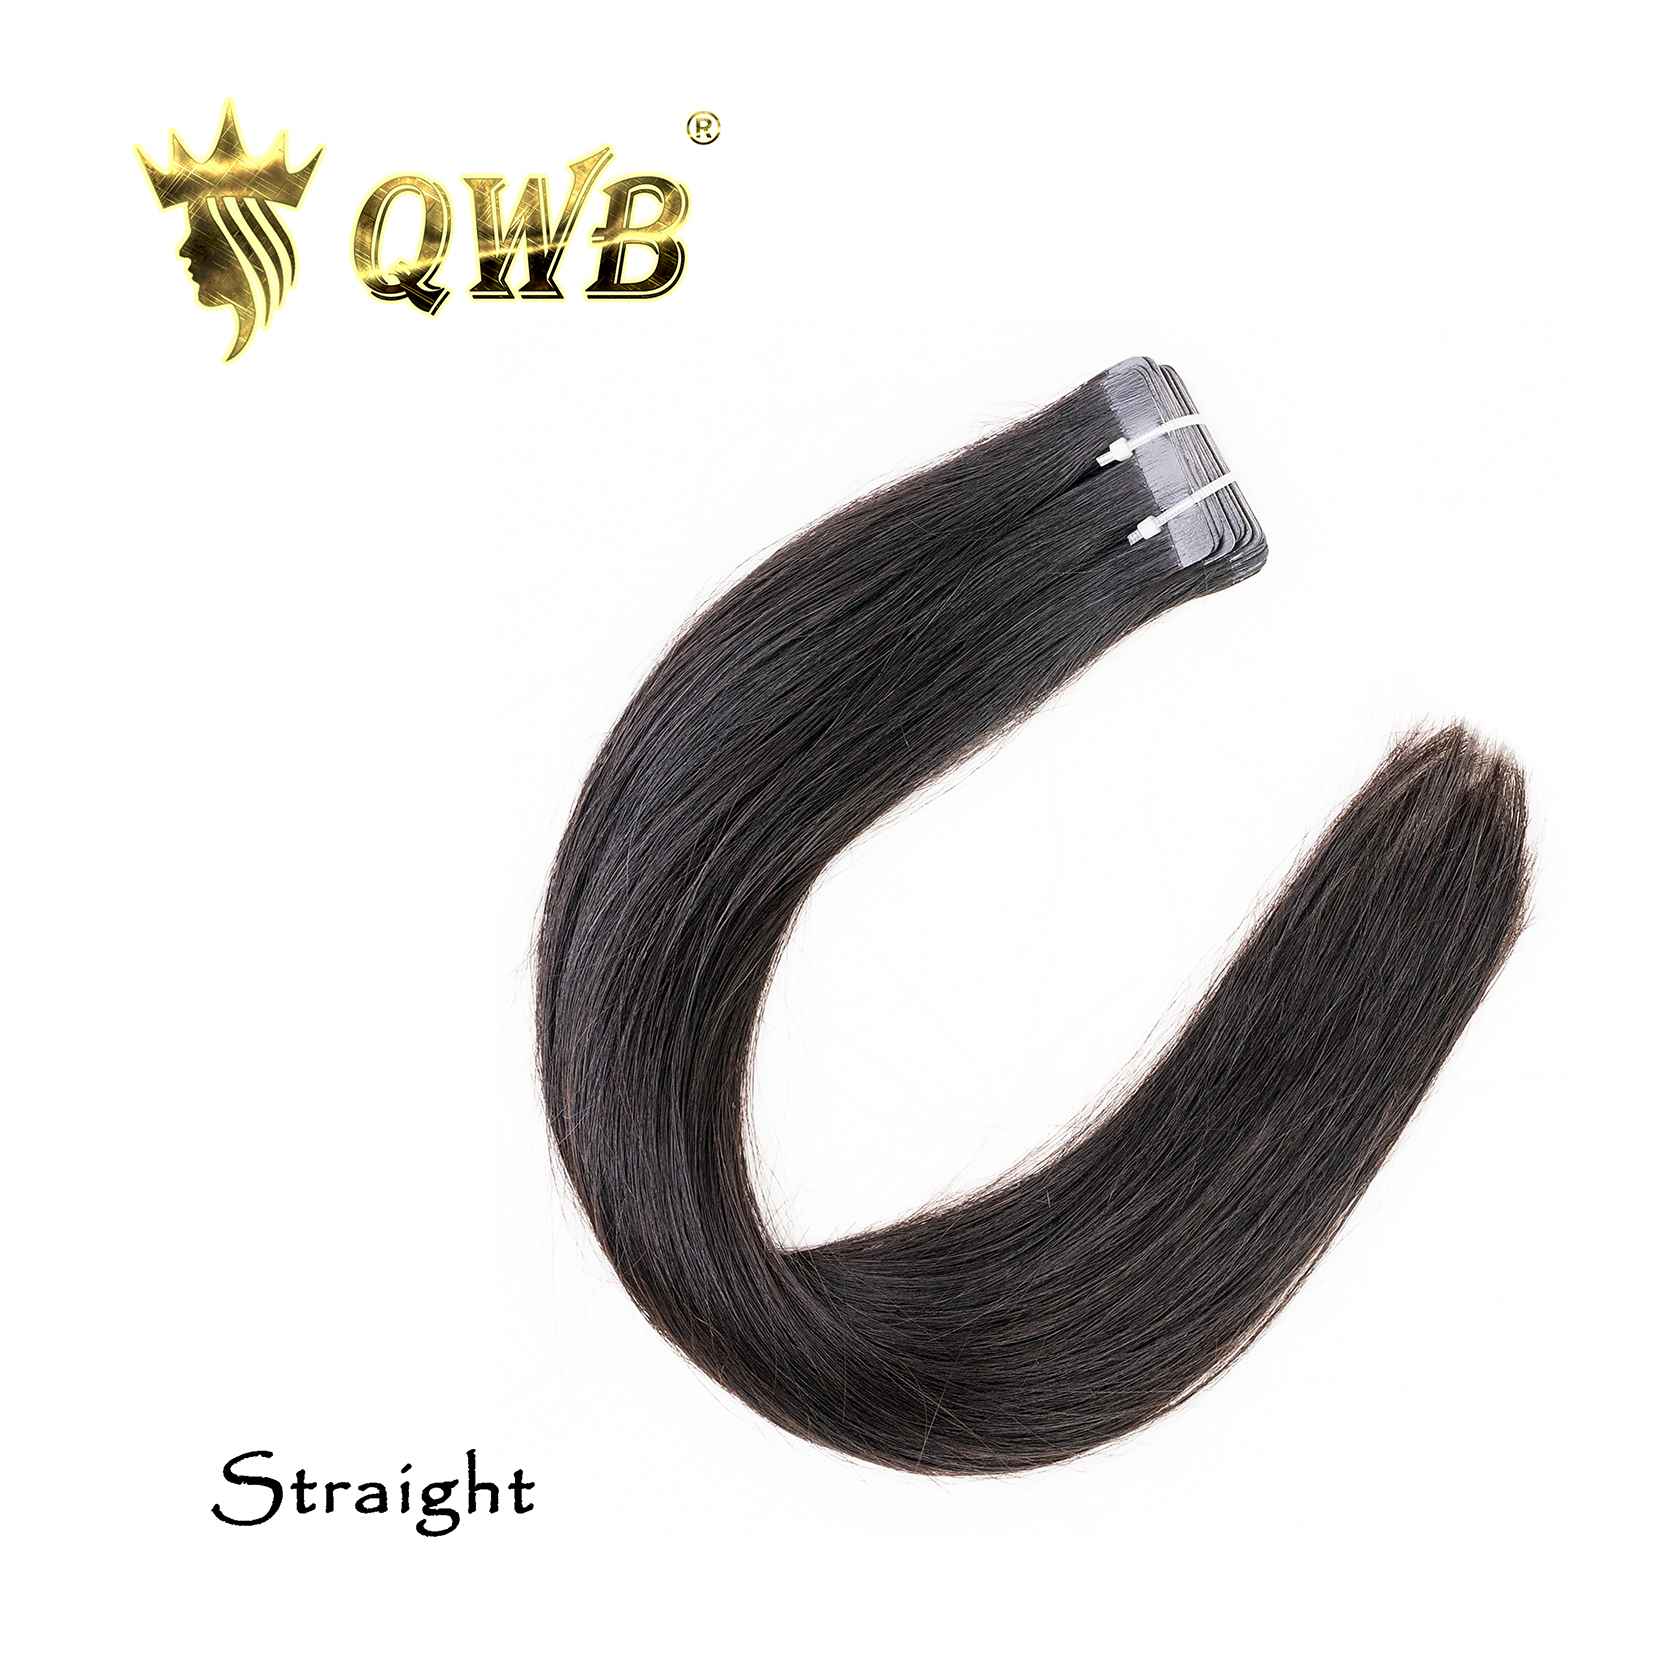 Weft Clips for Hair Extensions (20 Pack - Black/Gold) Black